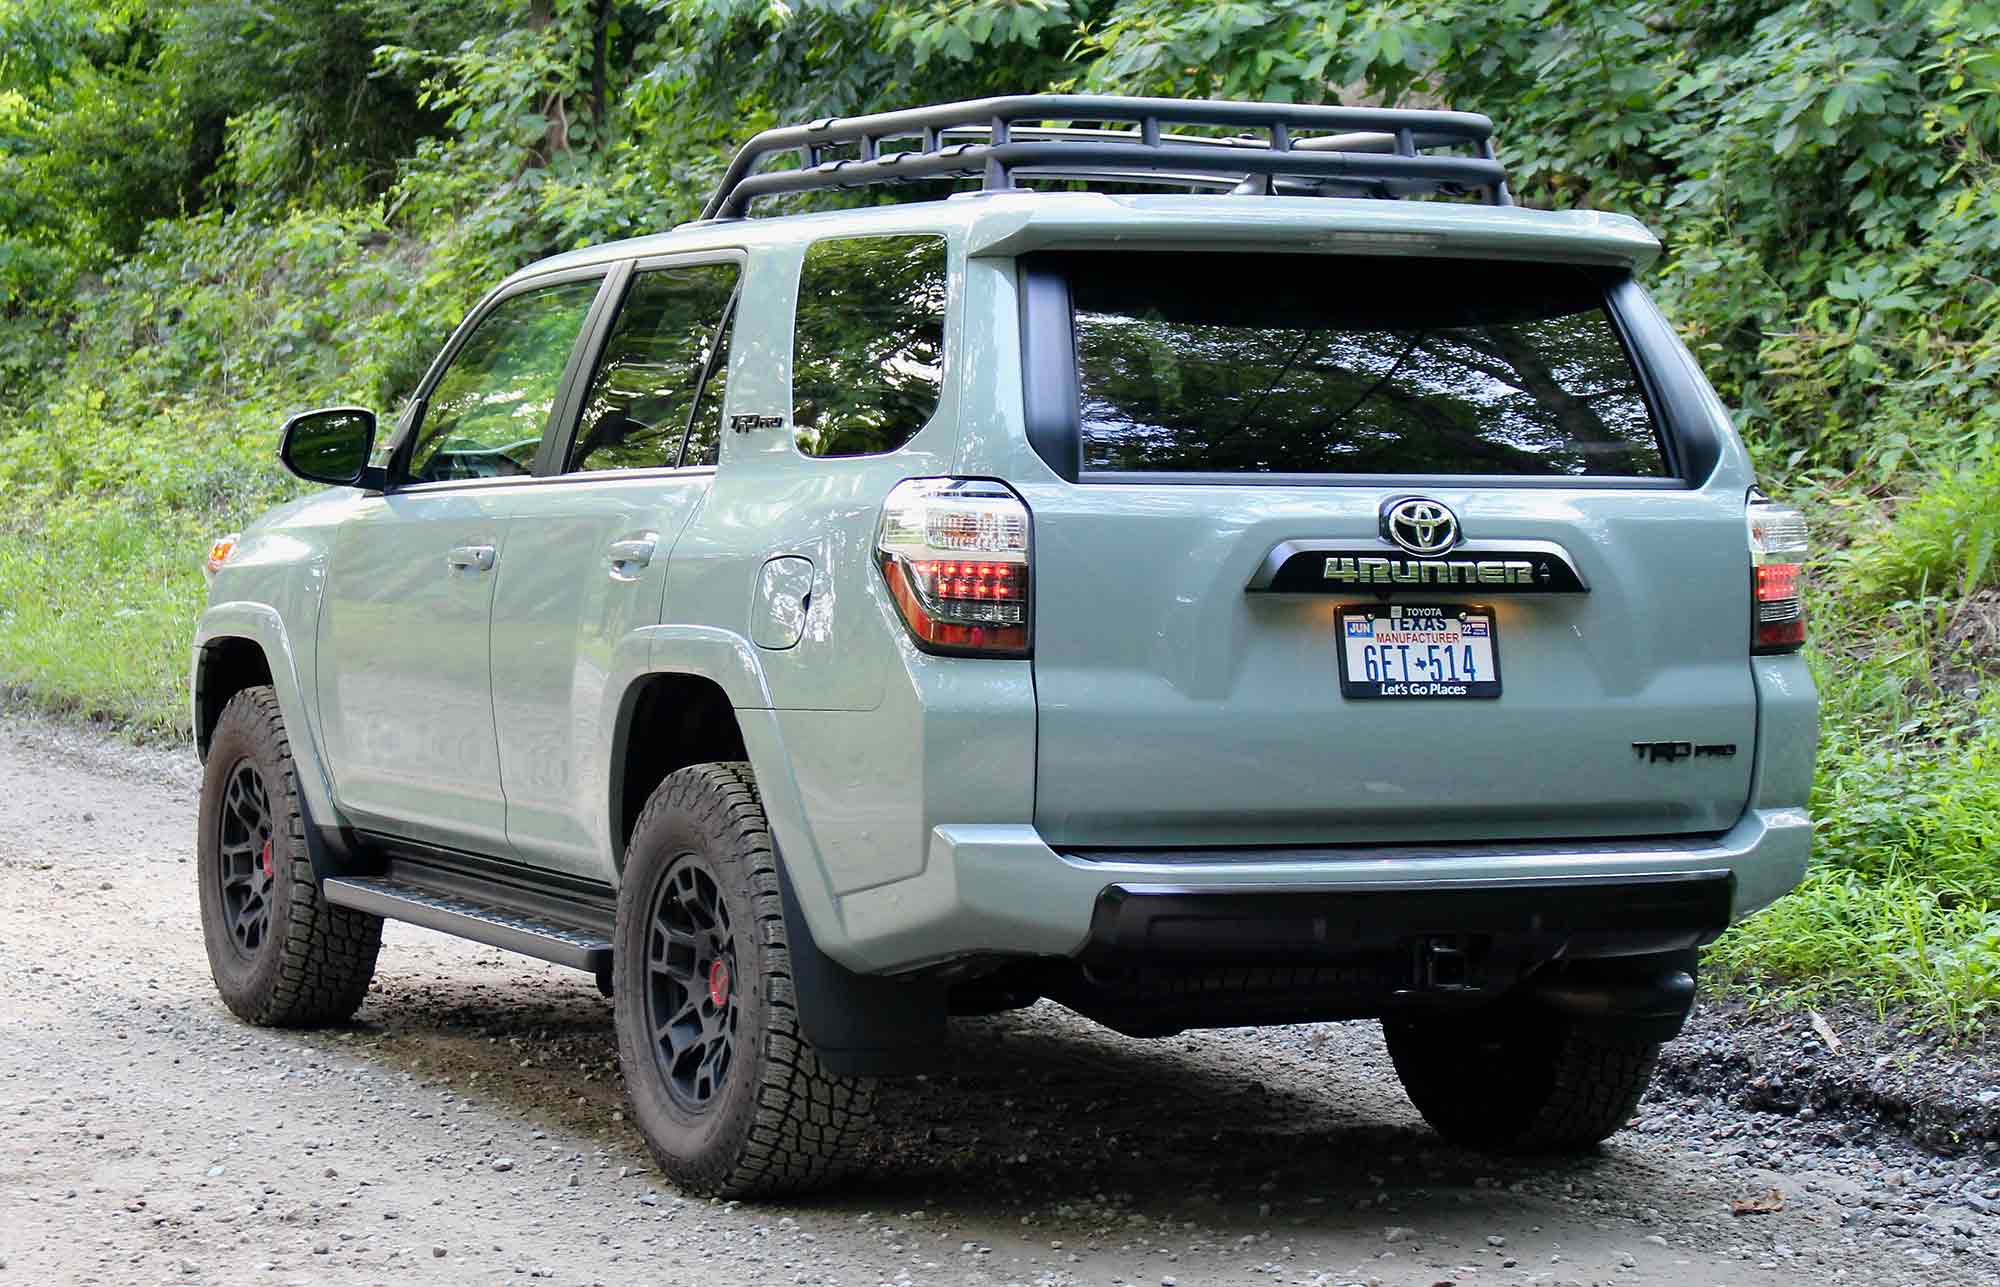 Marshall Goldman, located in Cleveland, has sold a Toyota 4Runner TRD Pro, with the stock code WTRDGR.